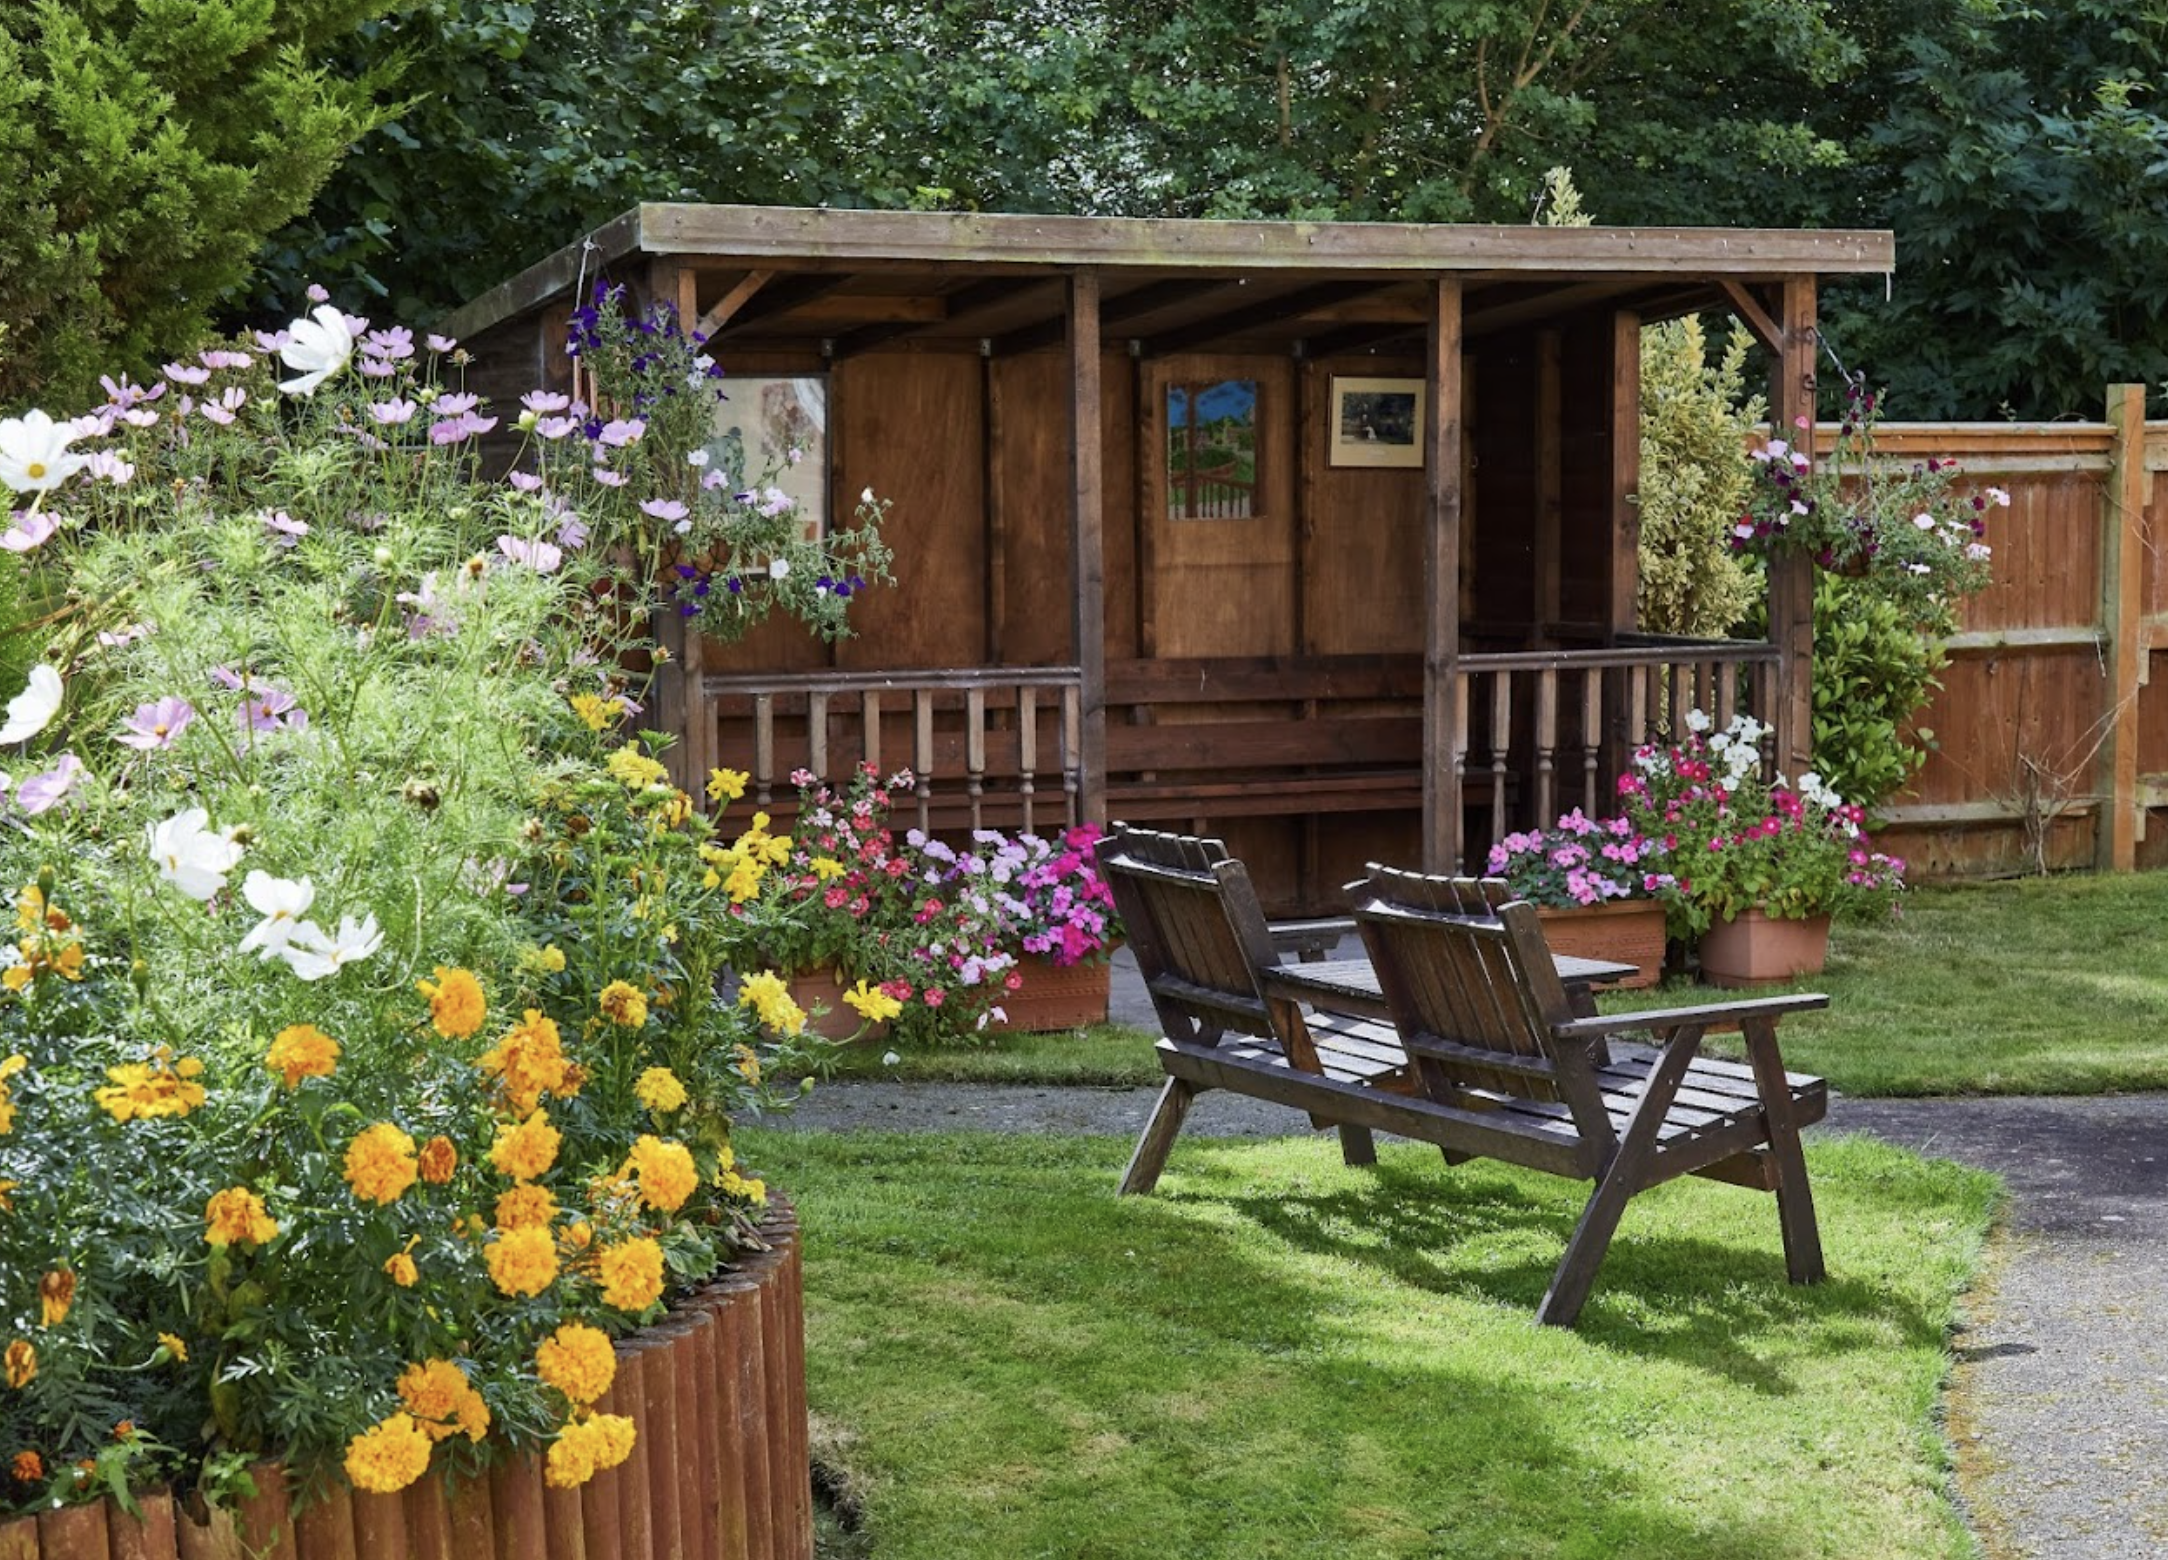 Garden of The Rhallt care home in Welshpool, Wales